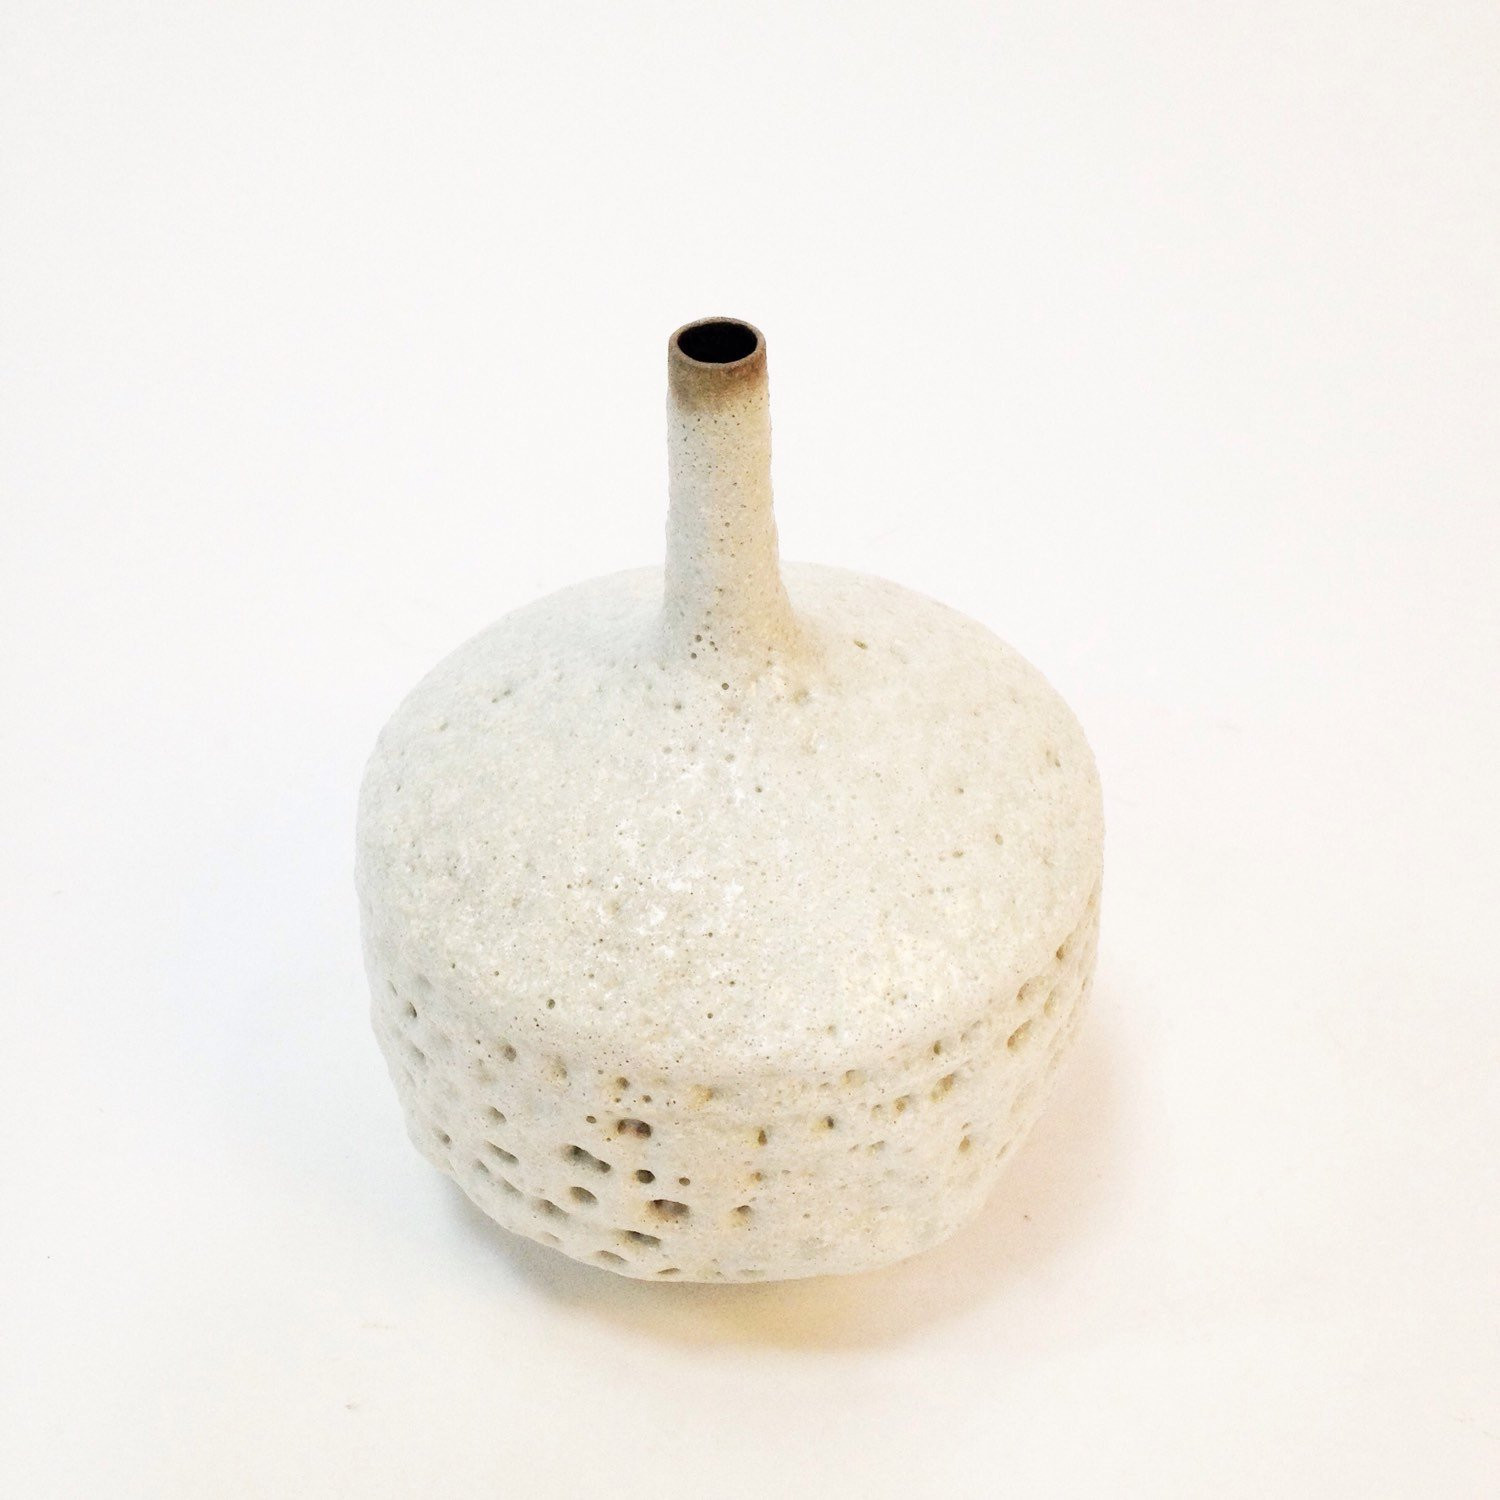 Handmade Ceramic Vases for Sale Of Made to order Crater Vase In White Lava Glaze by Sarapaloma Etsy with Dzoom